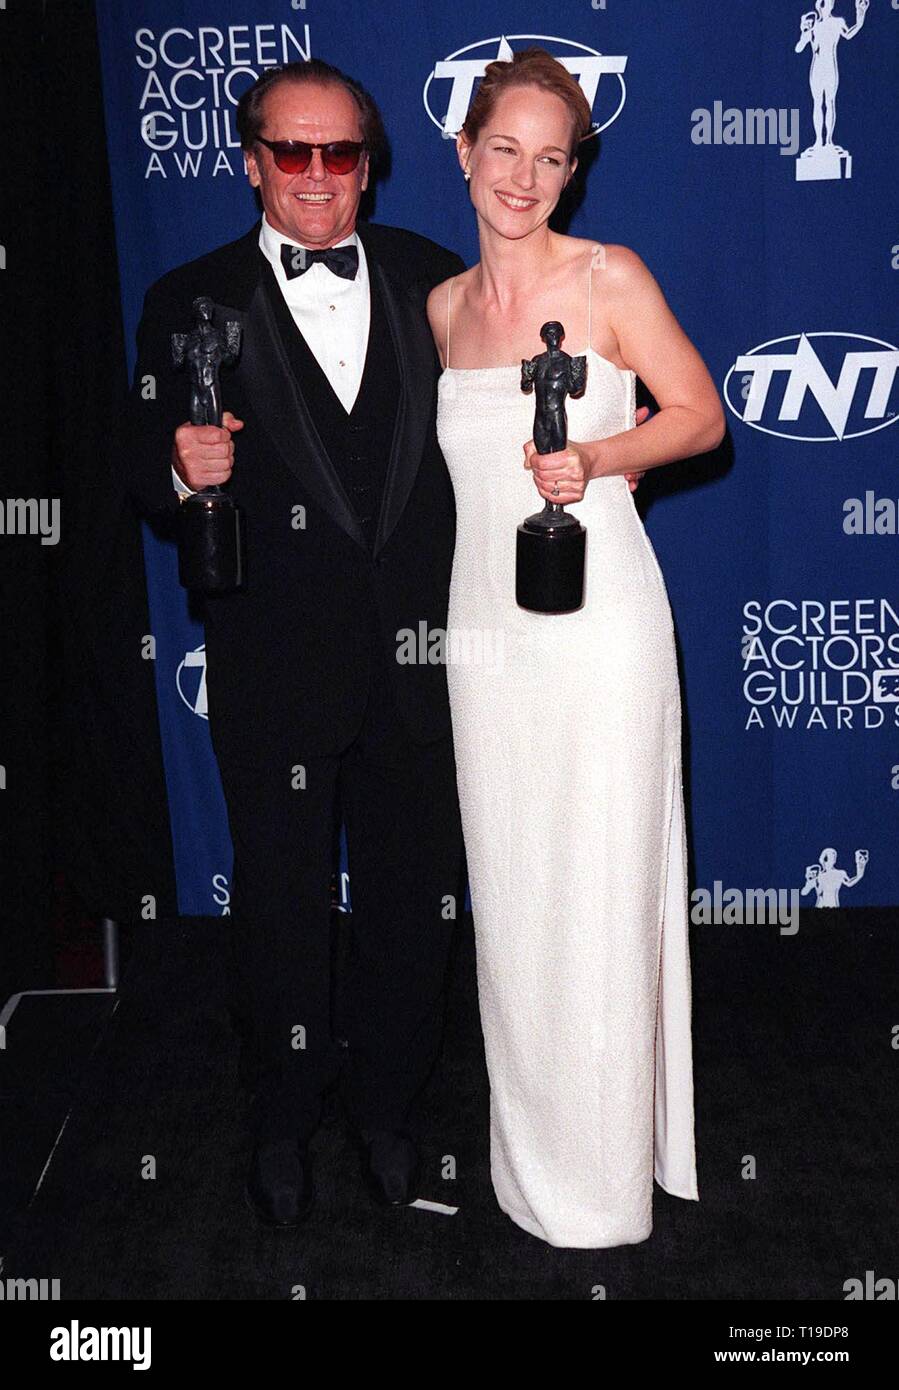 LOS ANGELES, CA - March 8, 1998: JACK NICHOLSON & HELEN HUNT at the Screen Actors Guild Awards in Los Angeles where they won Best Actor & Actress awards for 'As Good As It Gets.' Stock Photo